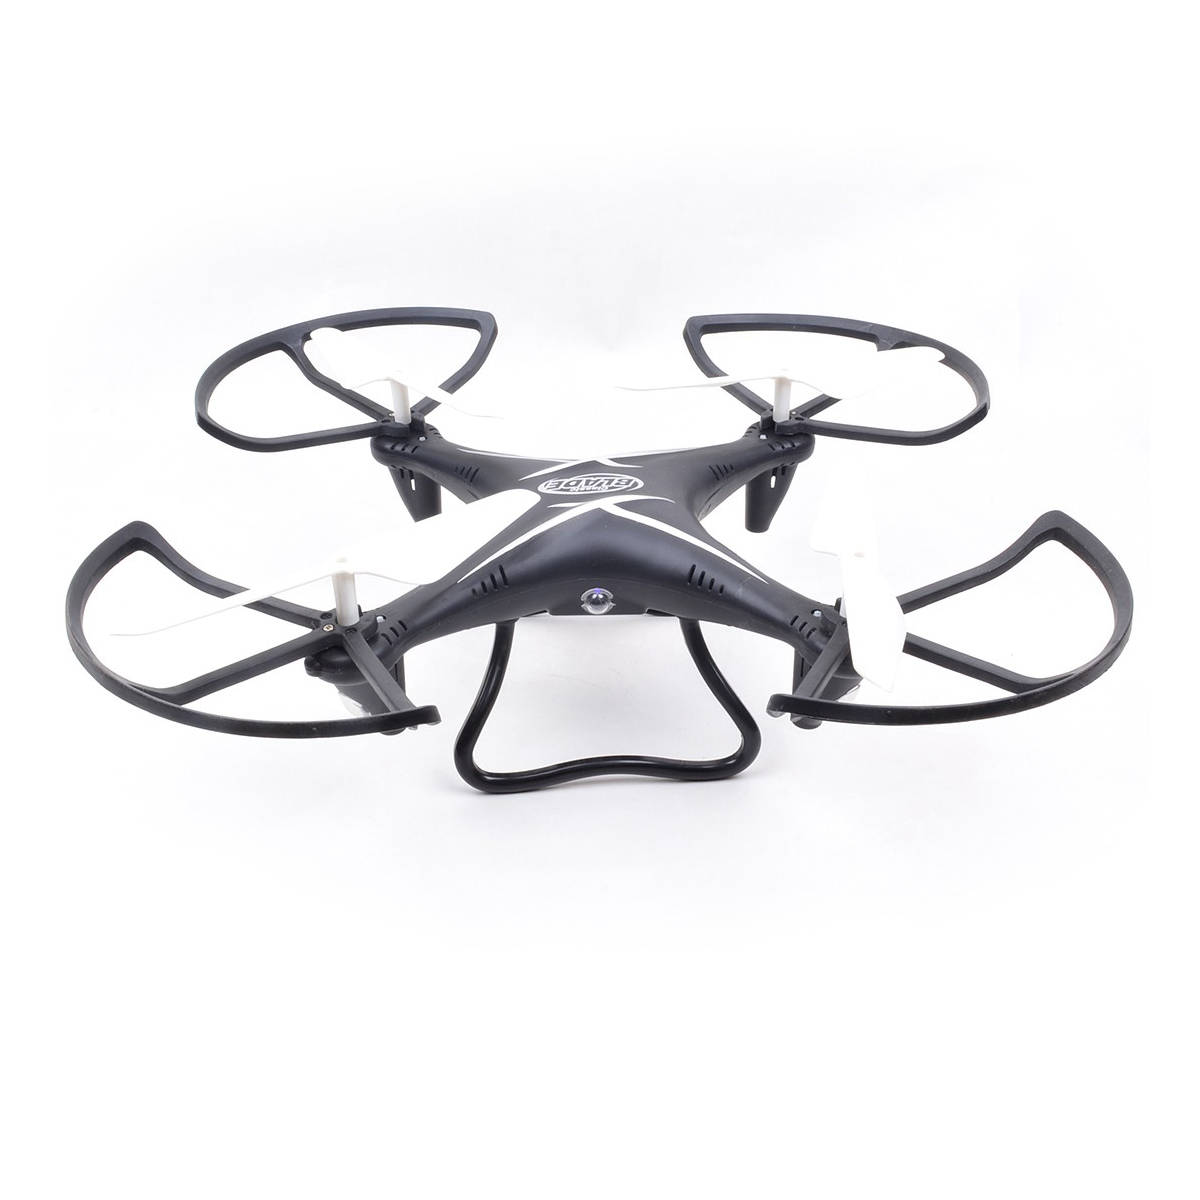 Expert 4 Channel 6-Axis Gyro Quadcopter